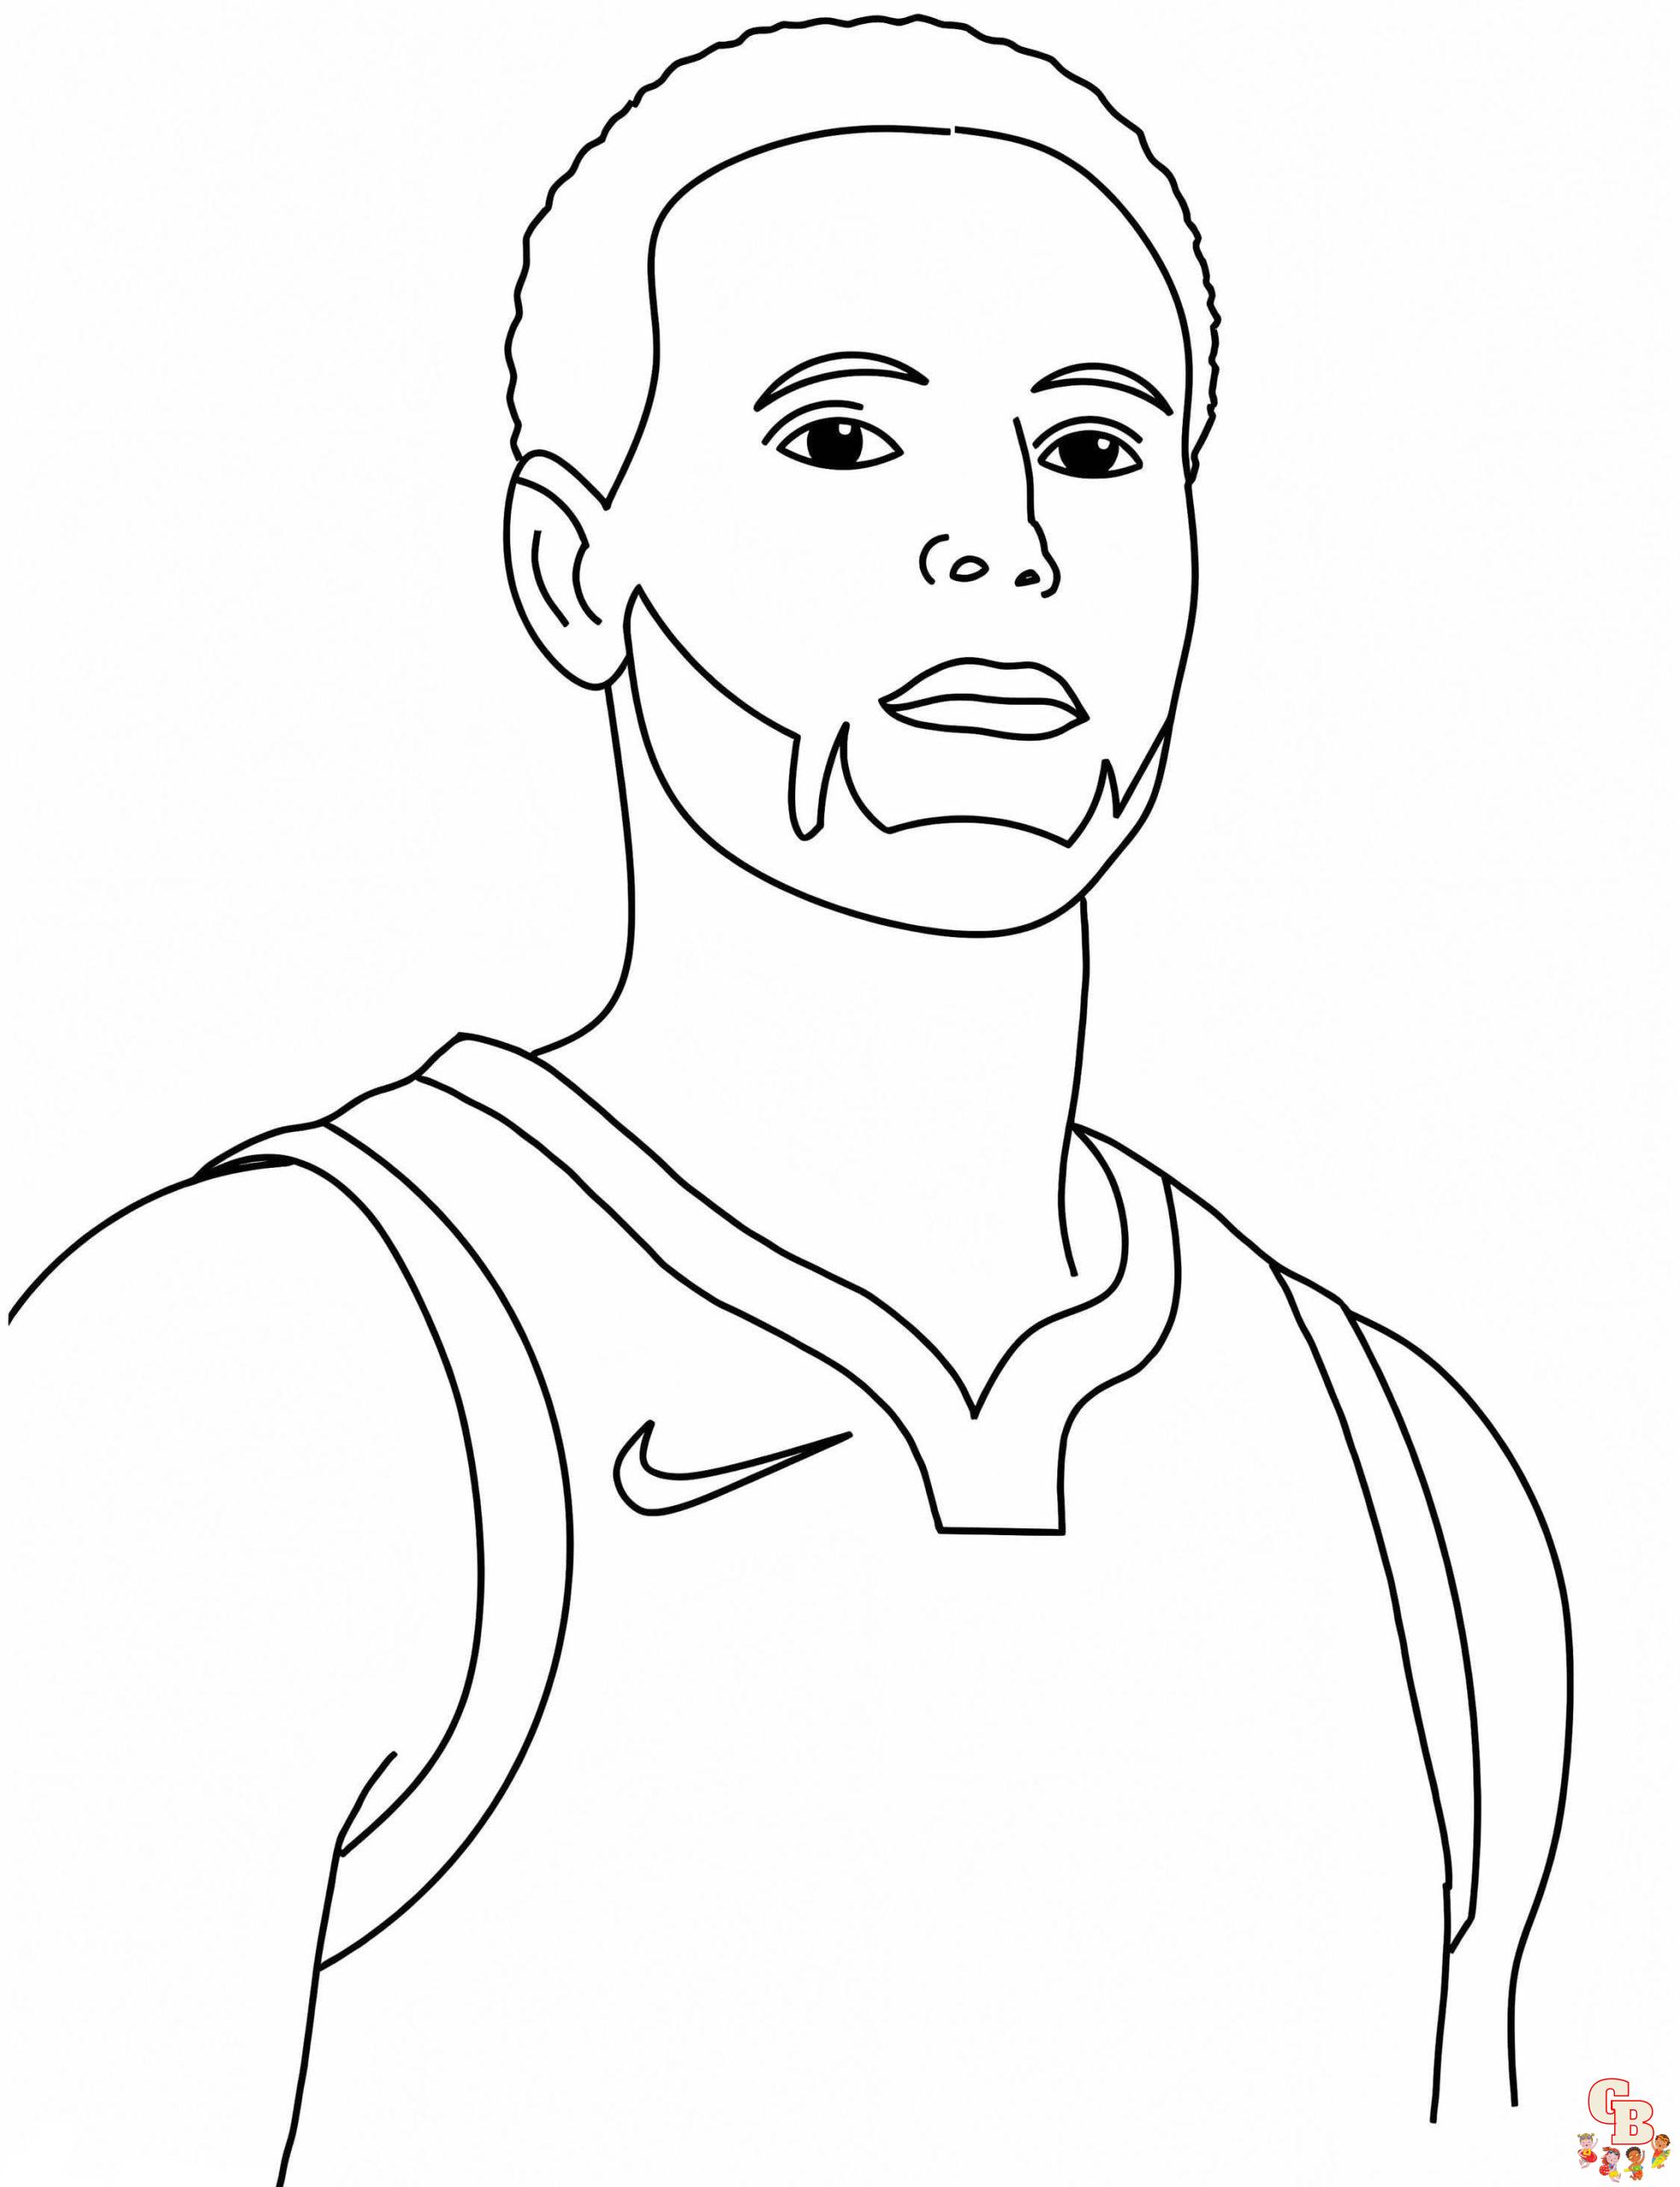 Printable stephen curry coloring pages free for kids and adults